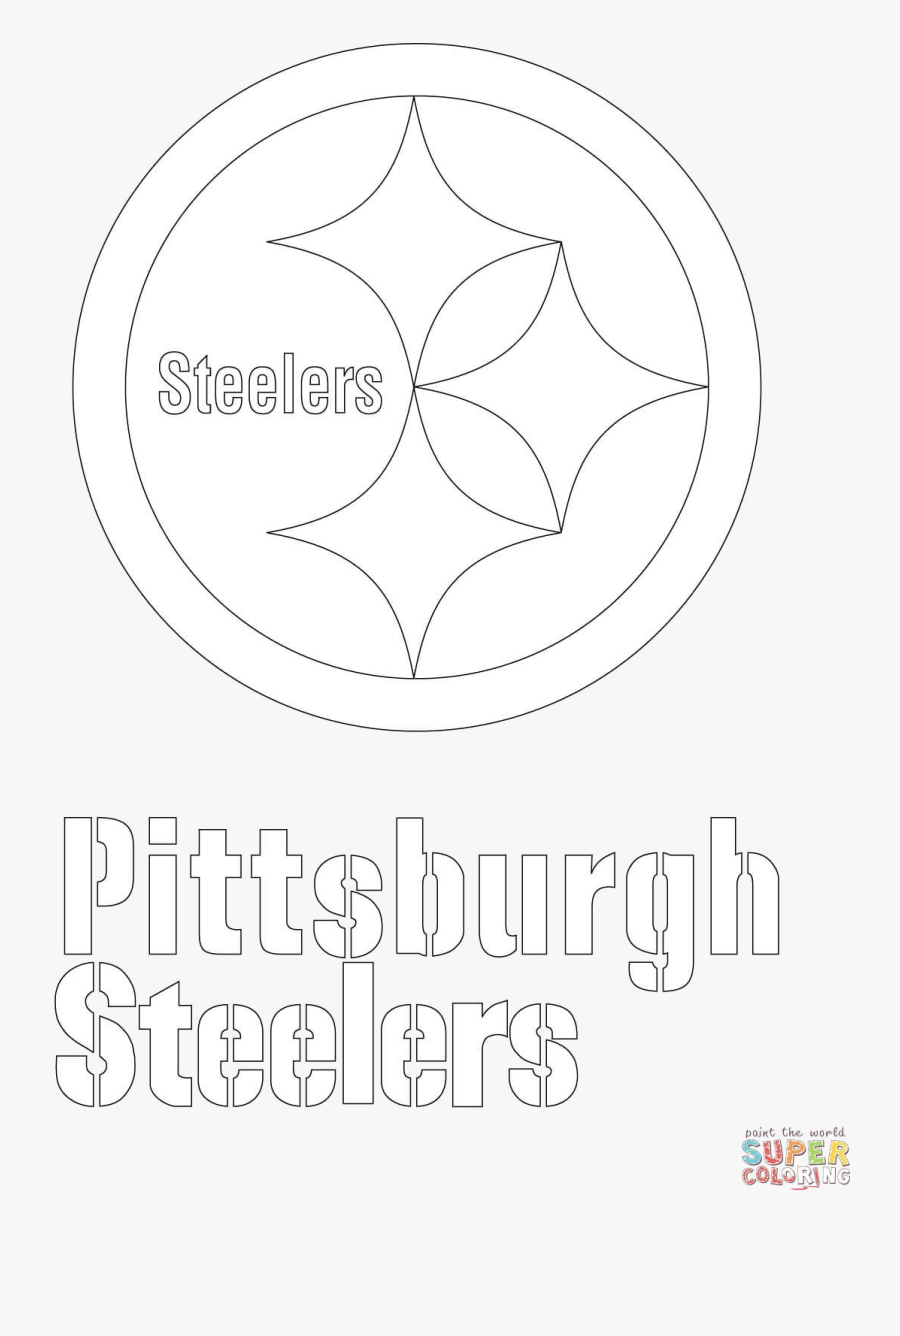 Steelers Stellers Clipart Line Free On Transparent - Circle, Transparent Clipart